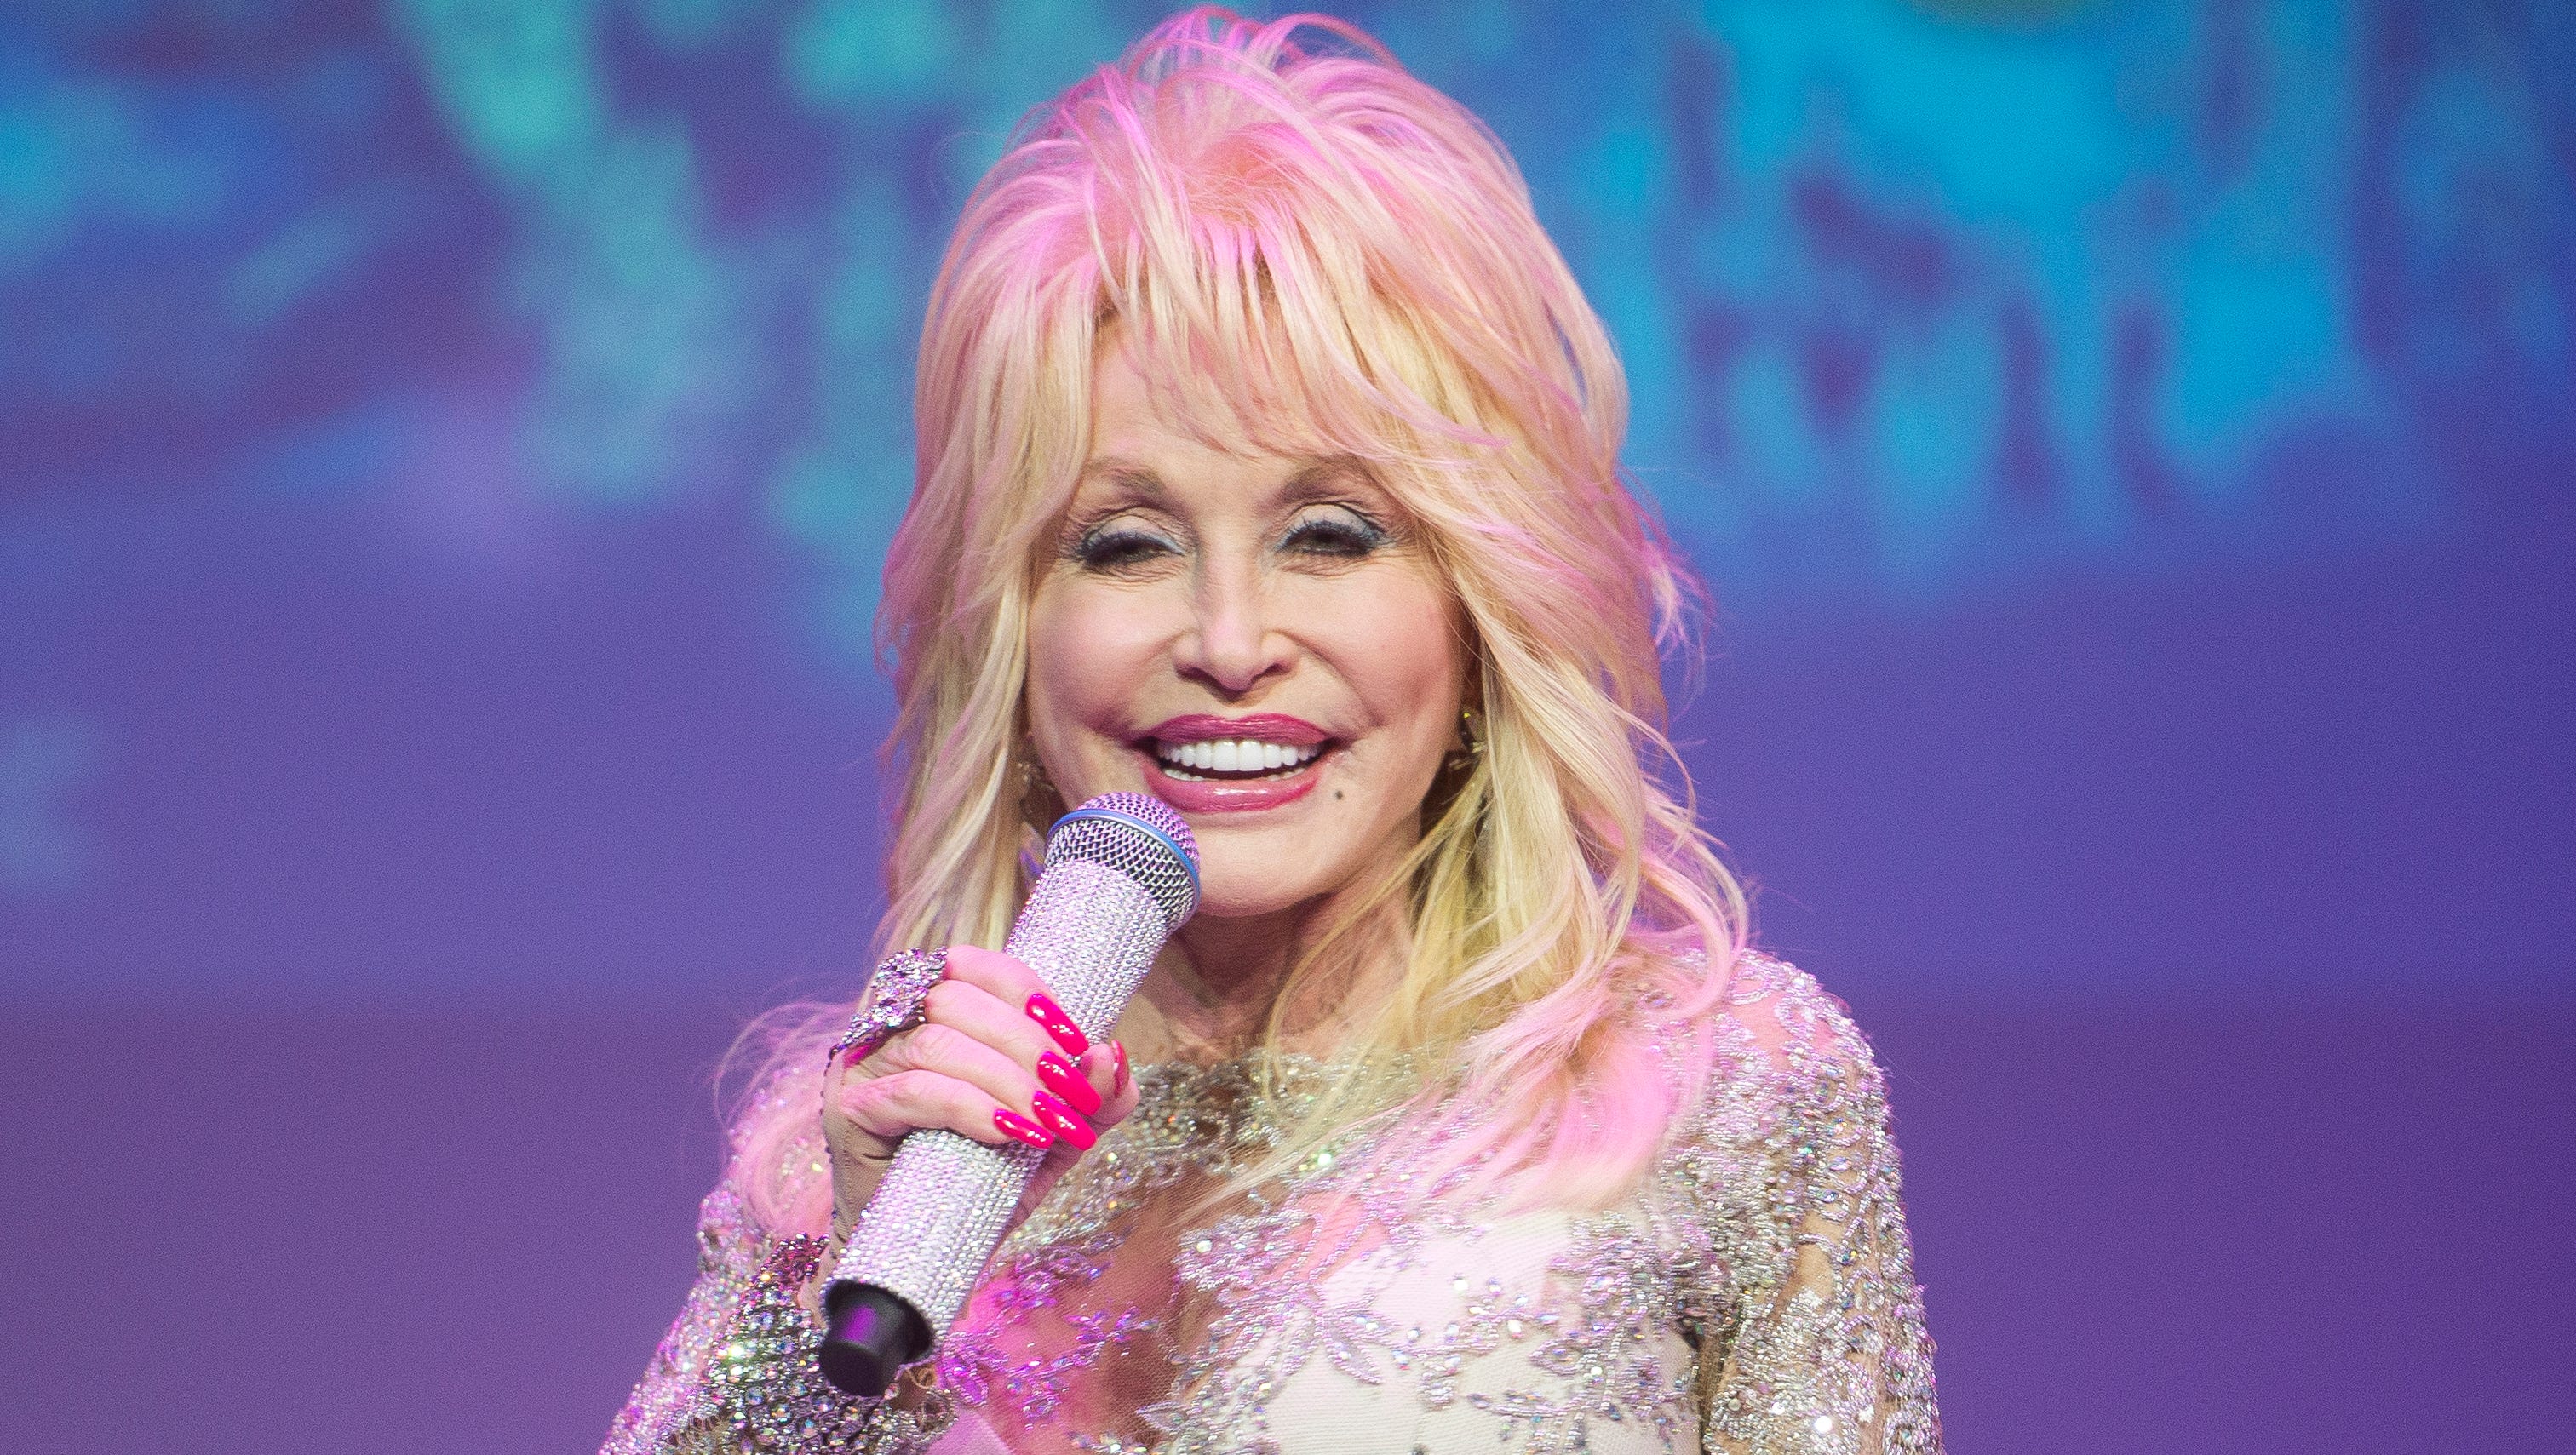 Dolly Parton names her wigs. See which one she calls 'Dragzilla'